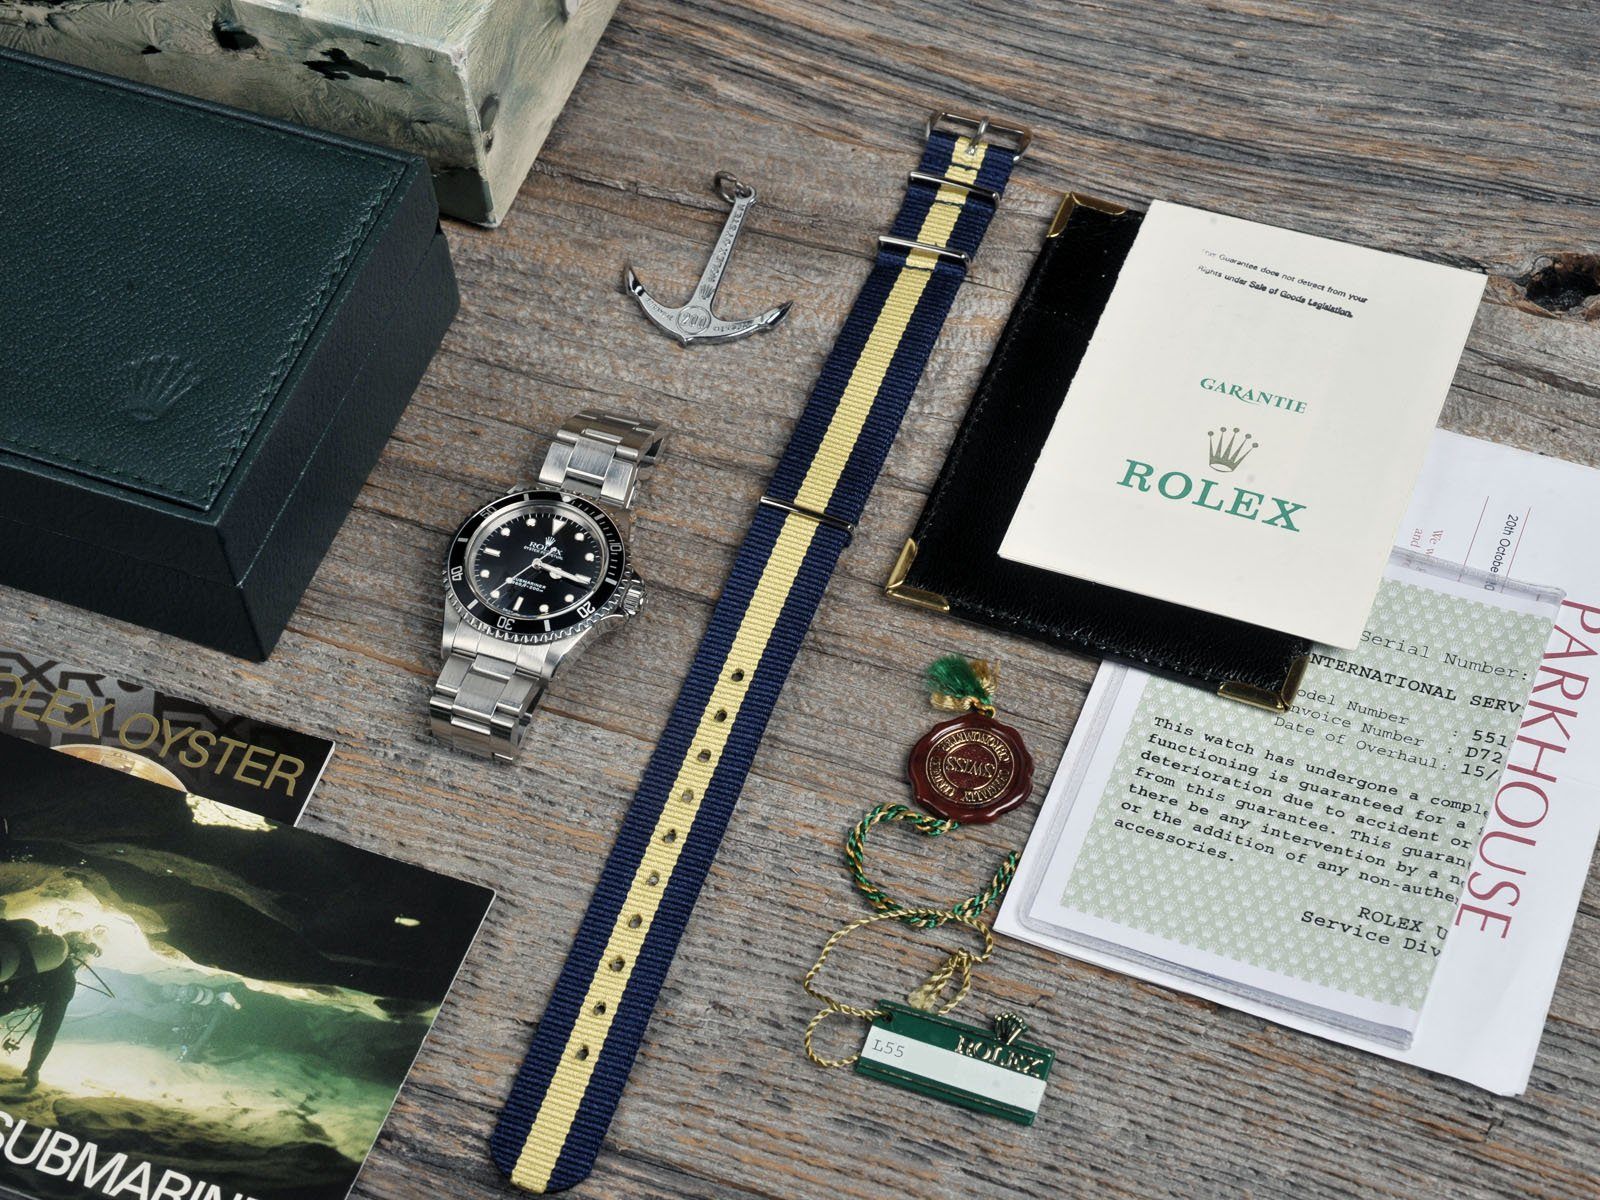 ROLEX 5513 SUBMARINER (WG) Timeless classic in a full package